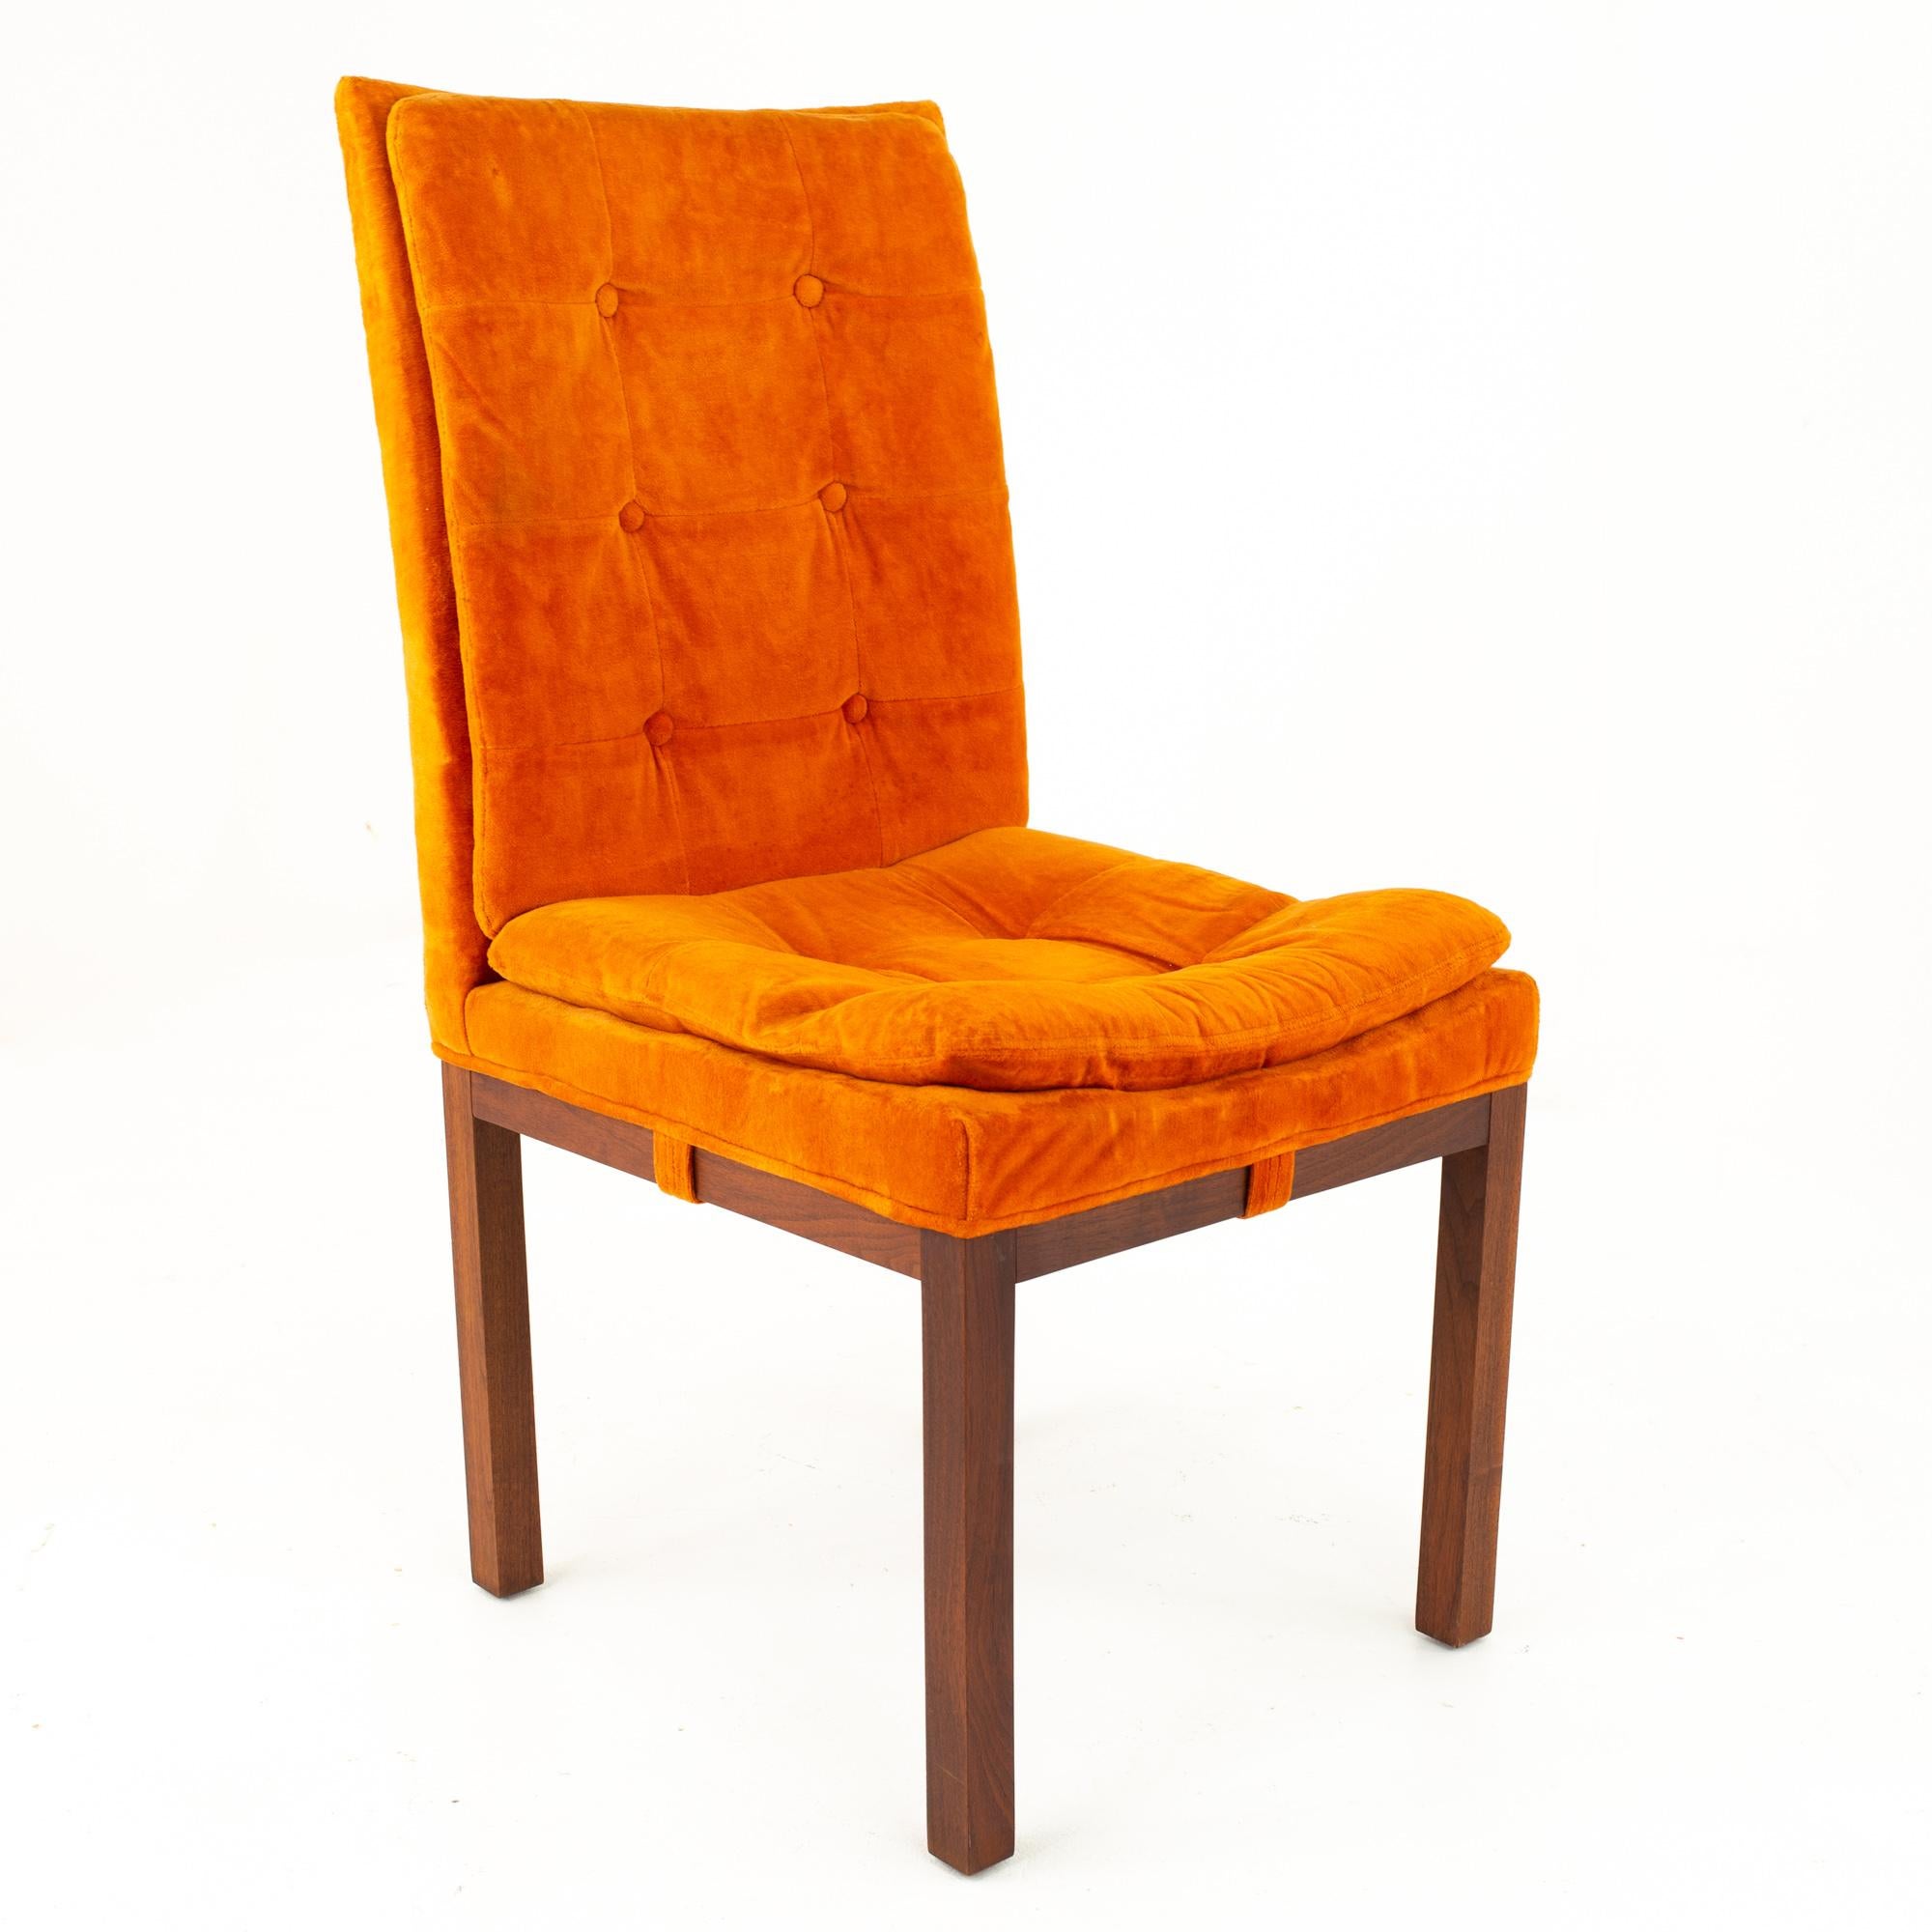 Milo Baughman Style Dillingham Orange and Walnut Upholstered Dining Chairs - Set 5